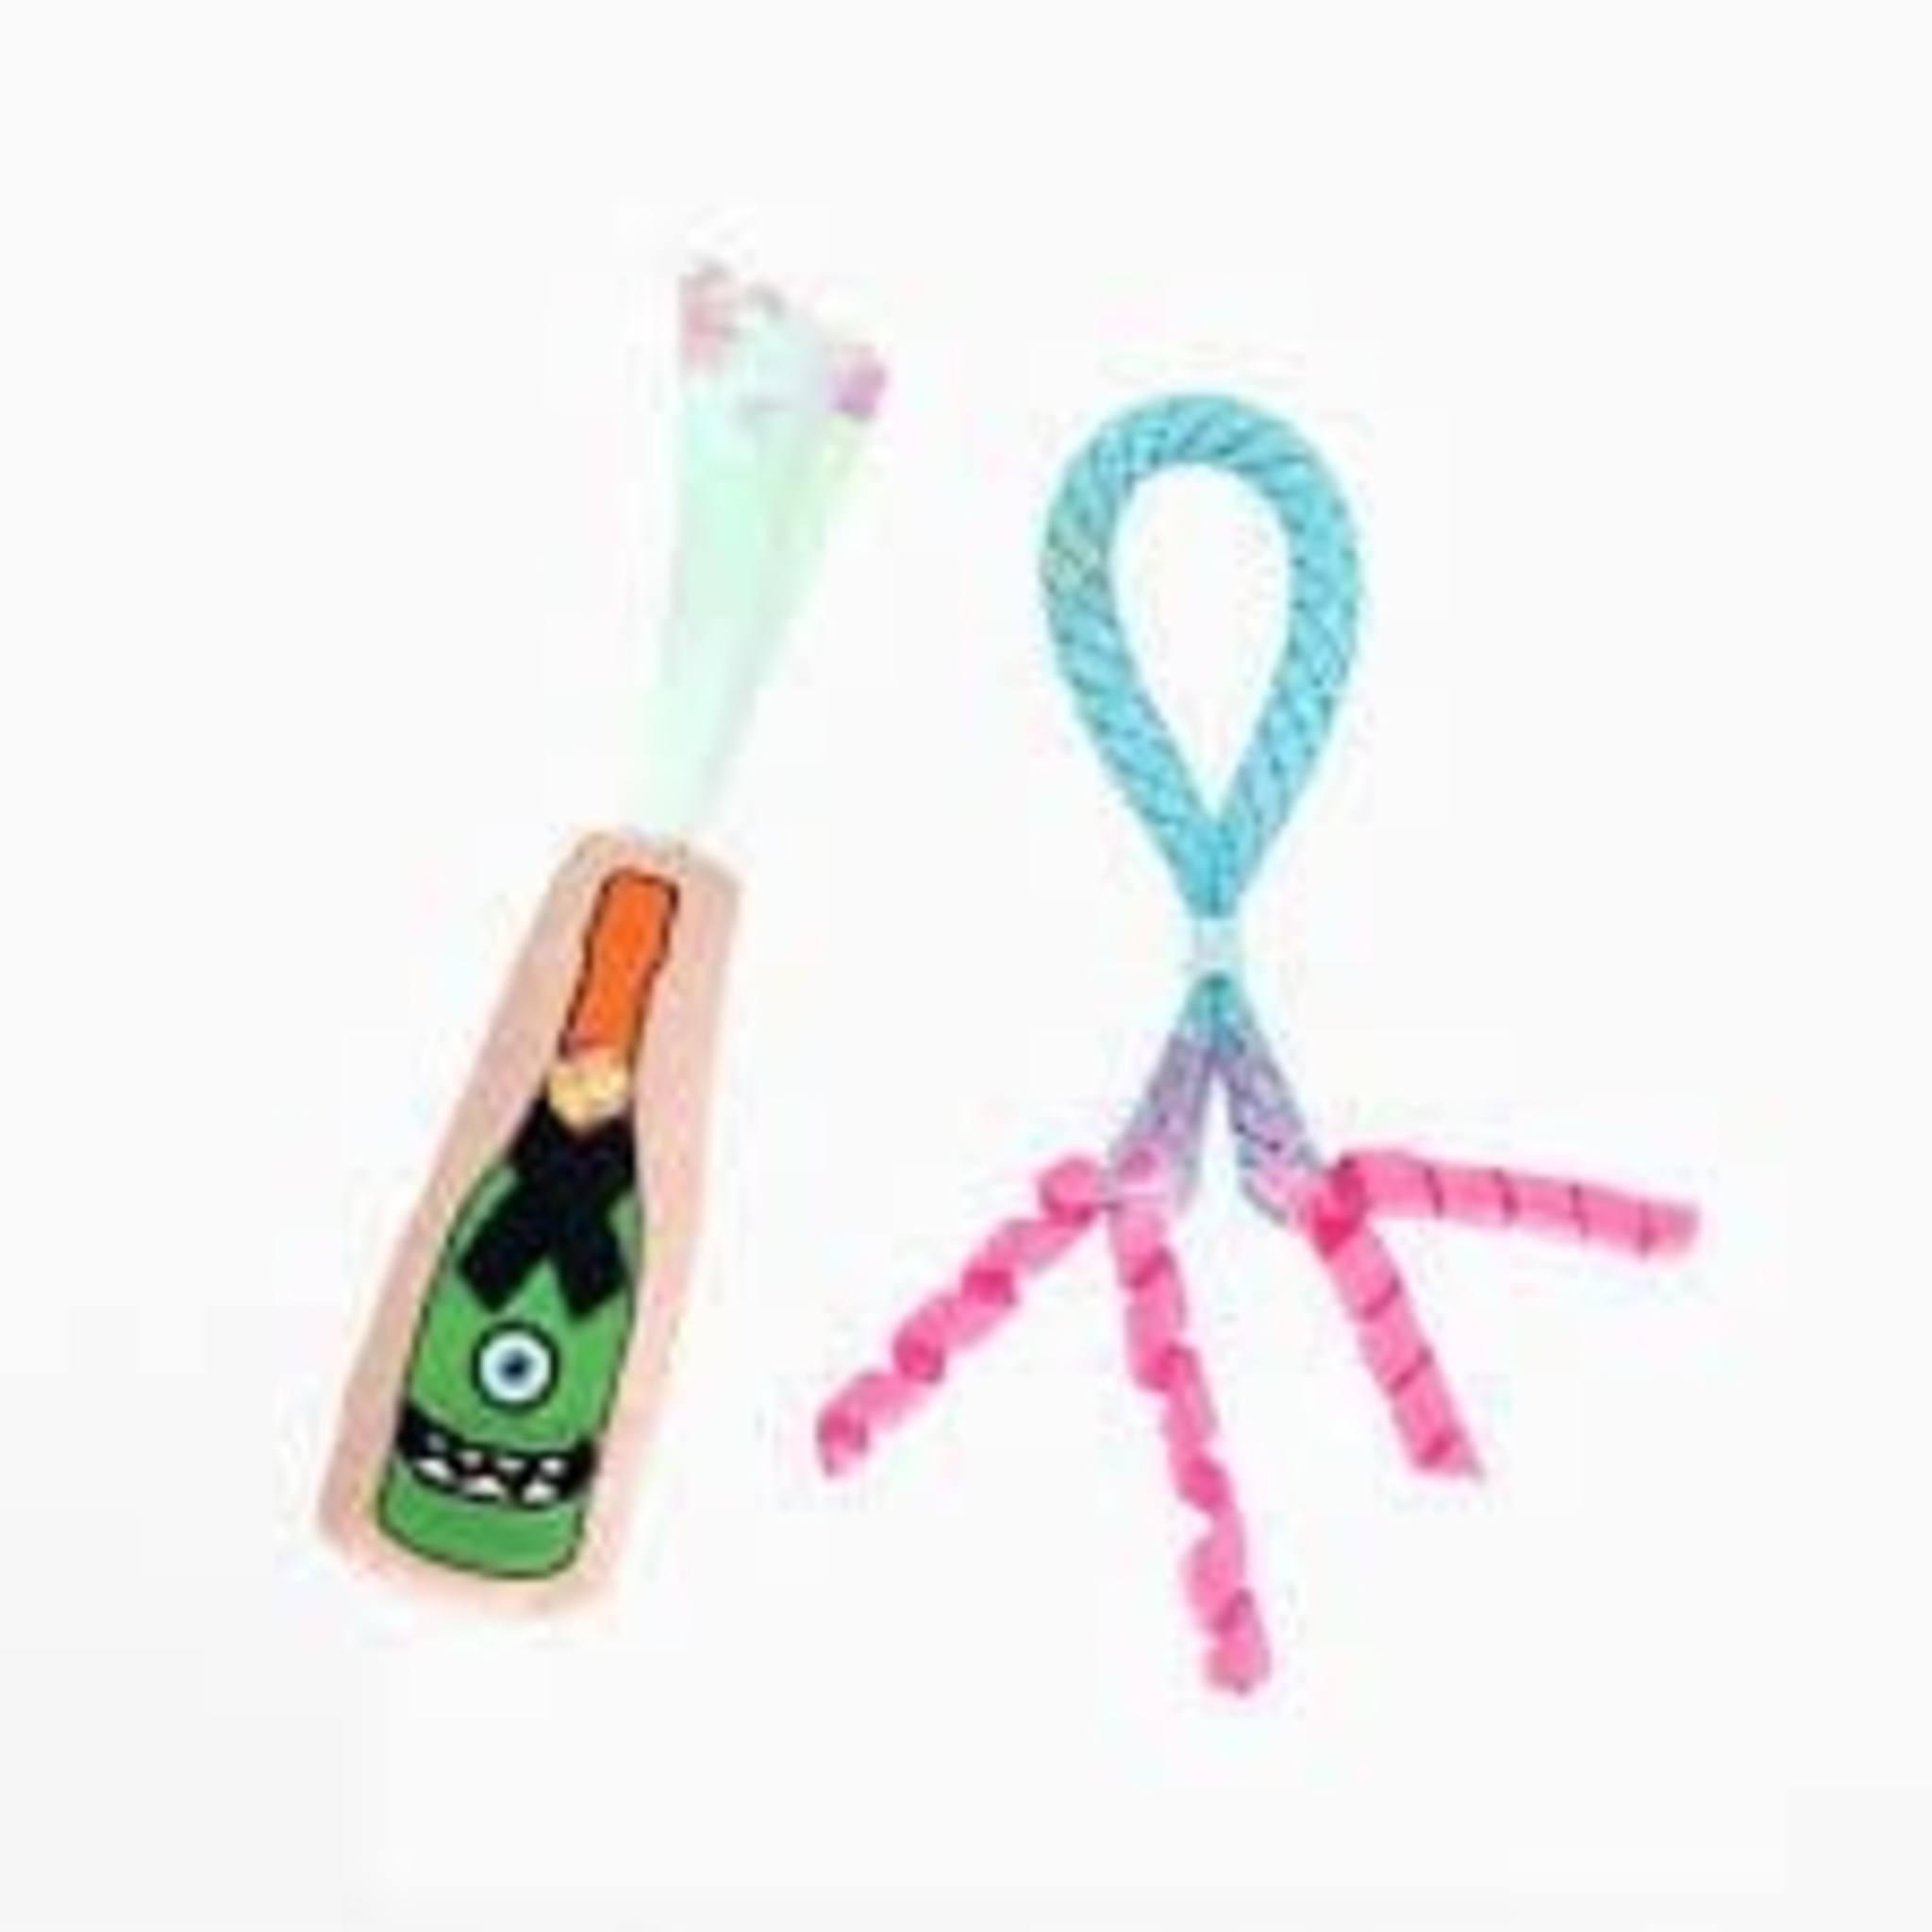 Hugsmart Meow Buddies Wine Bottle Cat Toy with Catnip 2 Pack